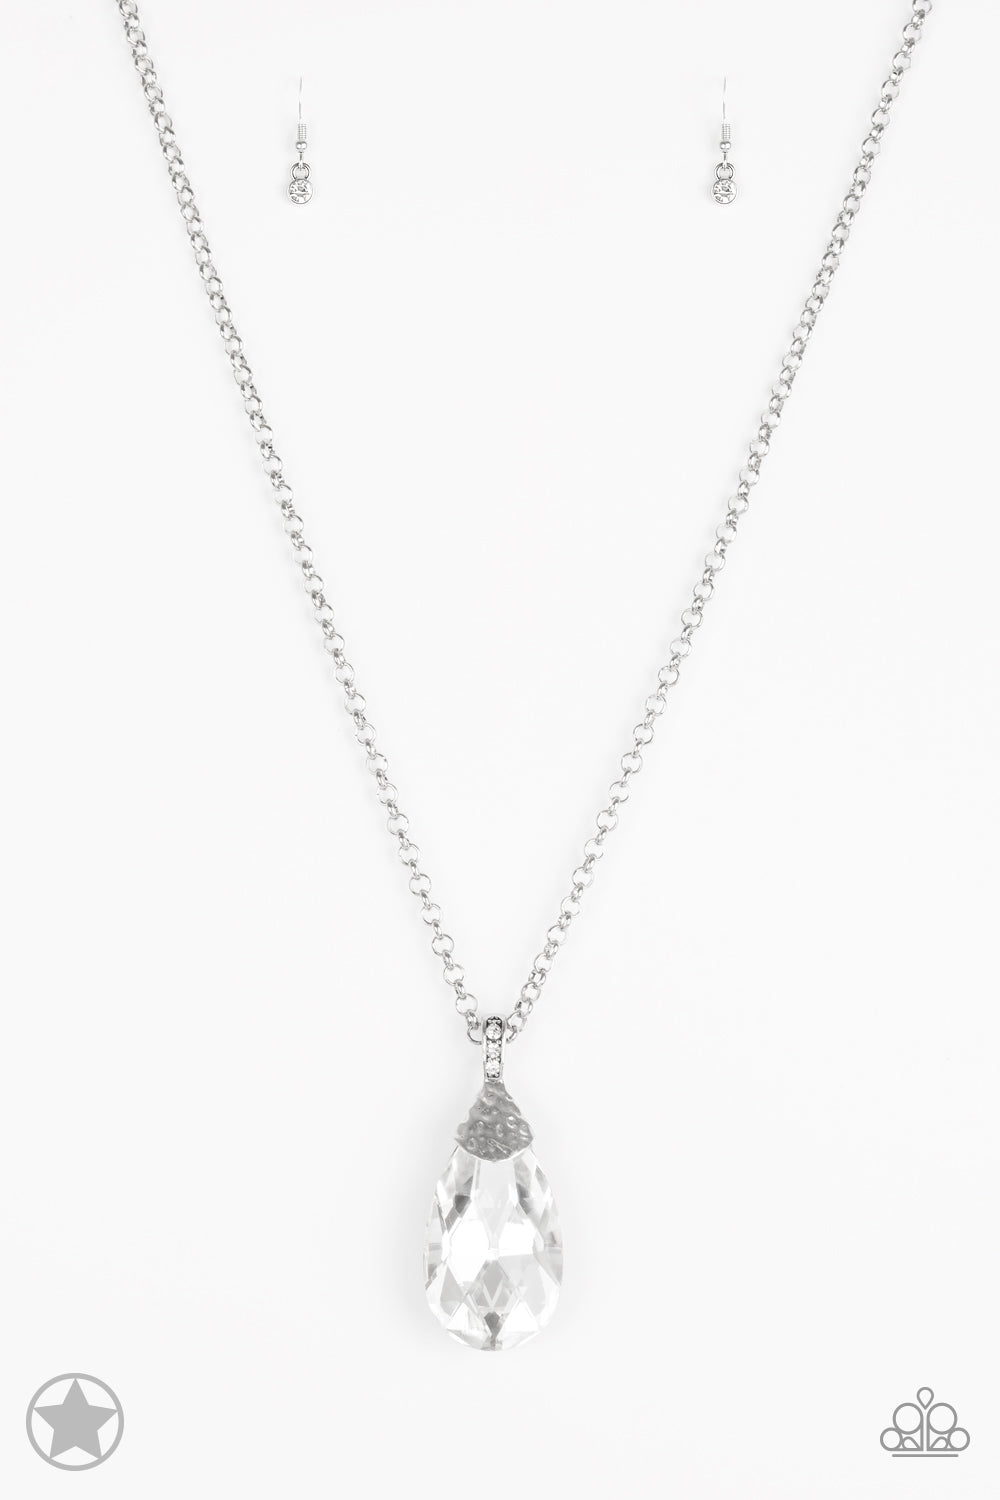 Paparazzi Accessories - Spellbinding Sparkle - White & Silver Necklace